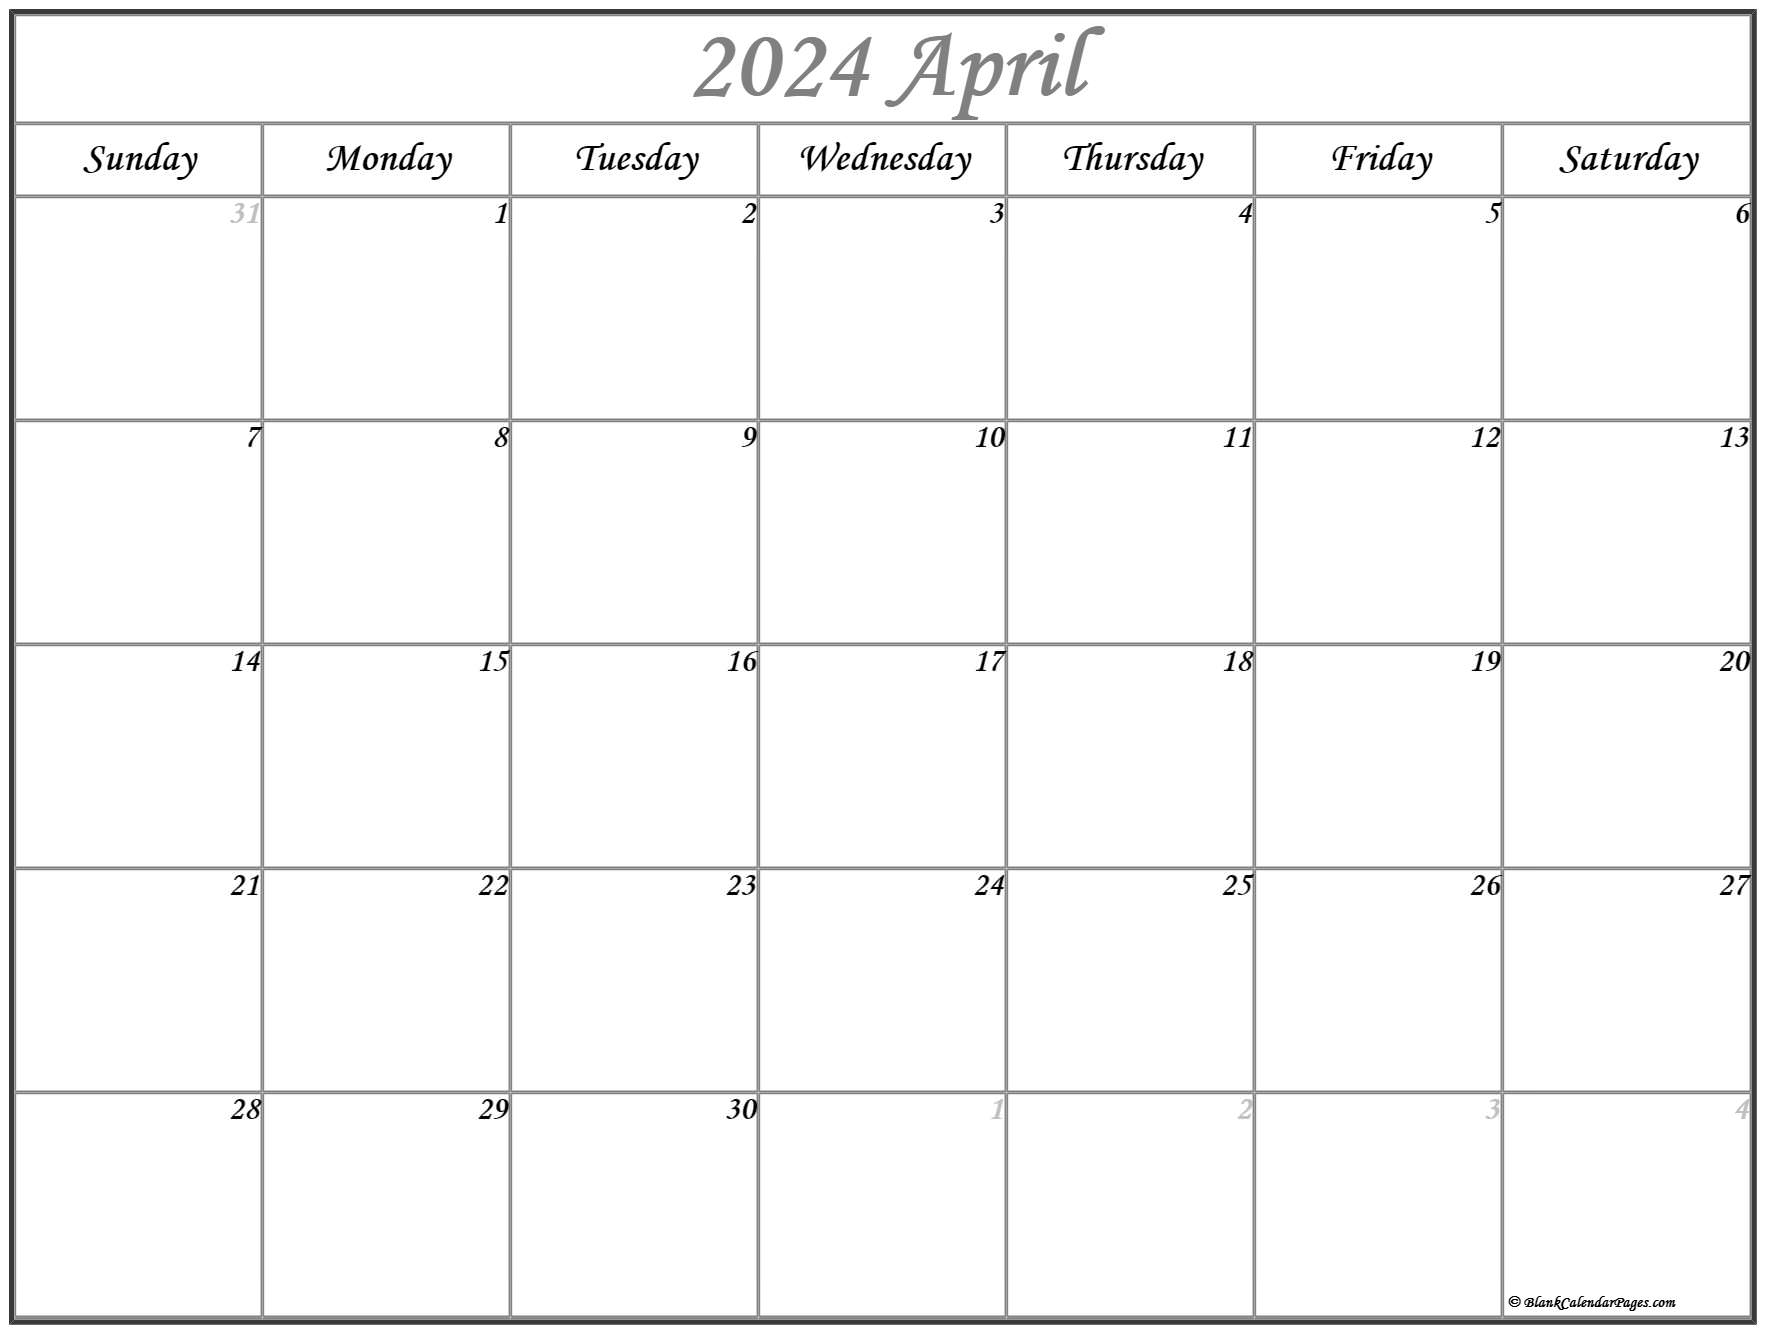 Blank April Calendar 2024: A Clean Slate for Planning and Organizing